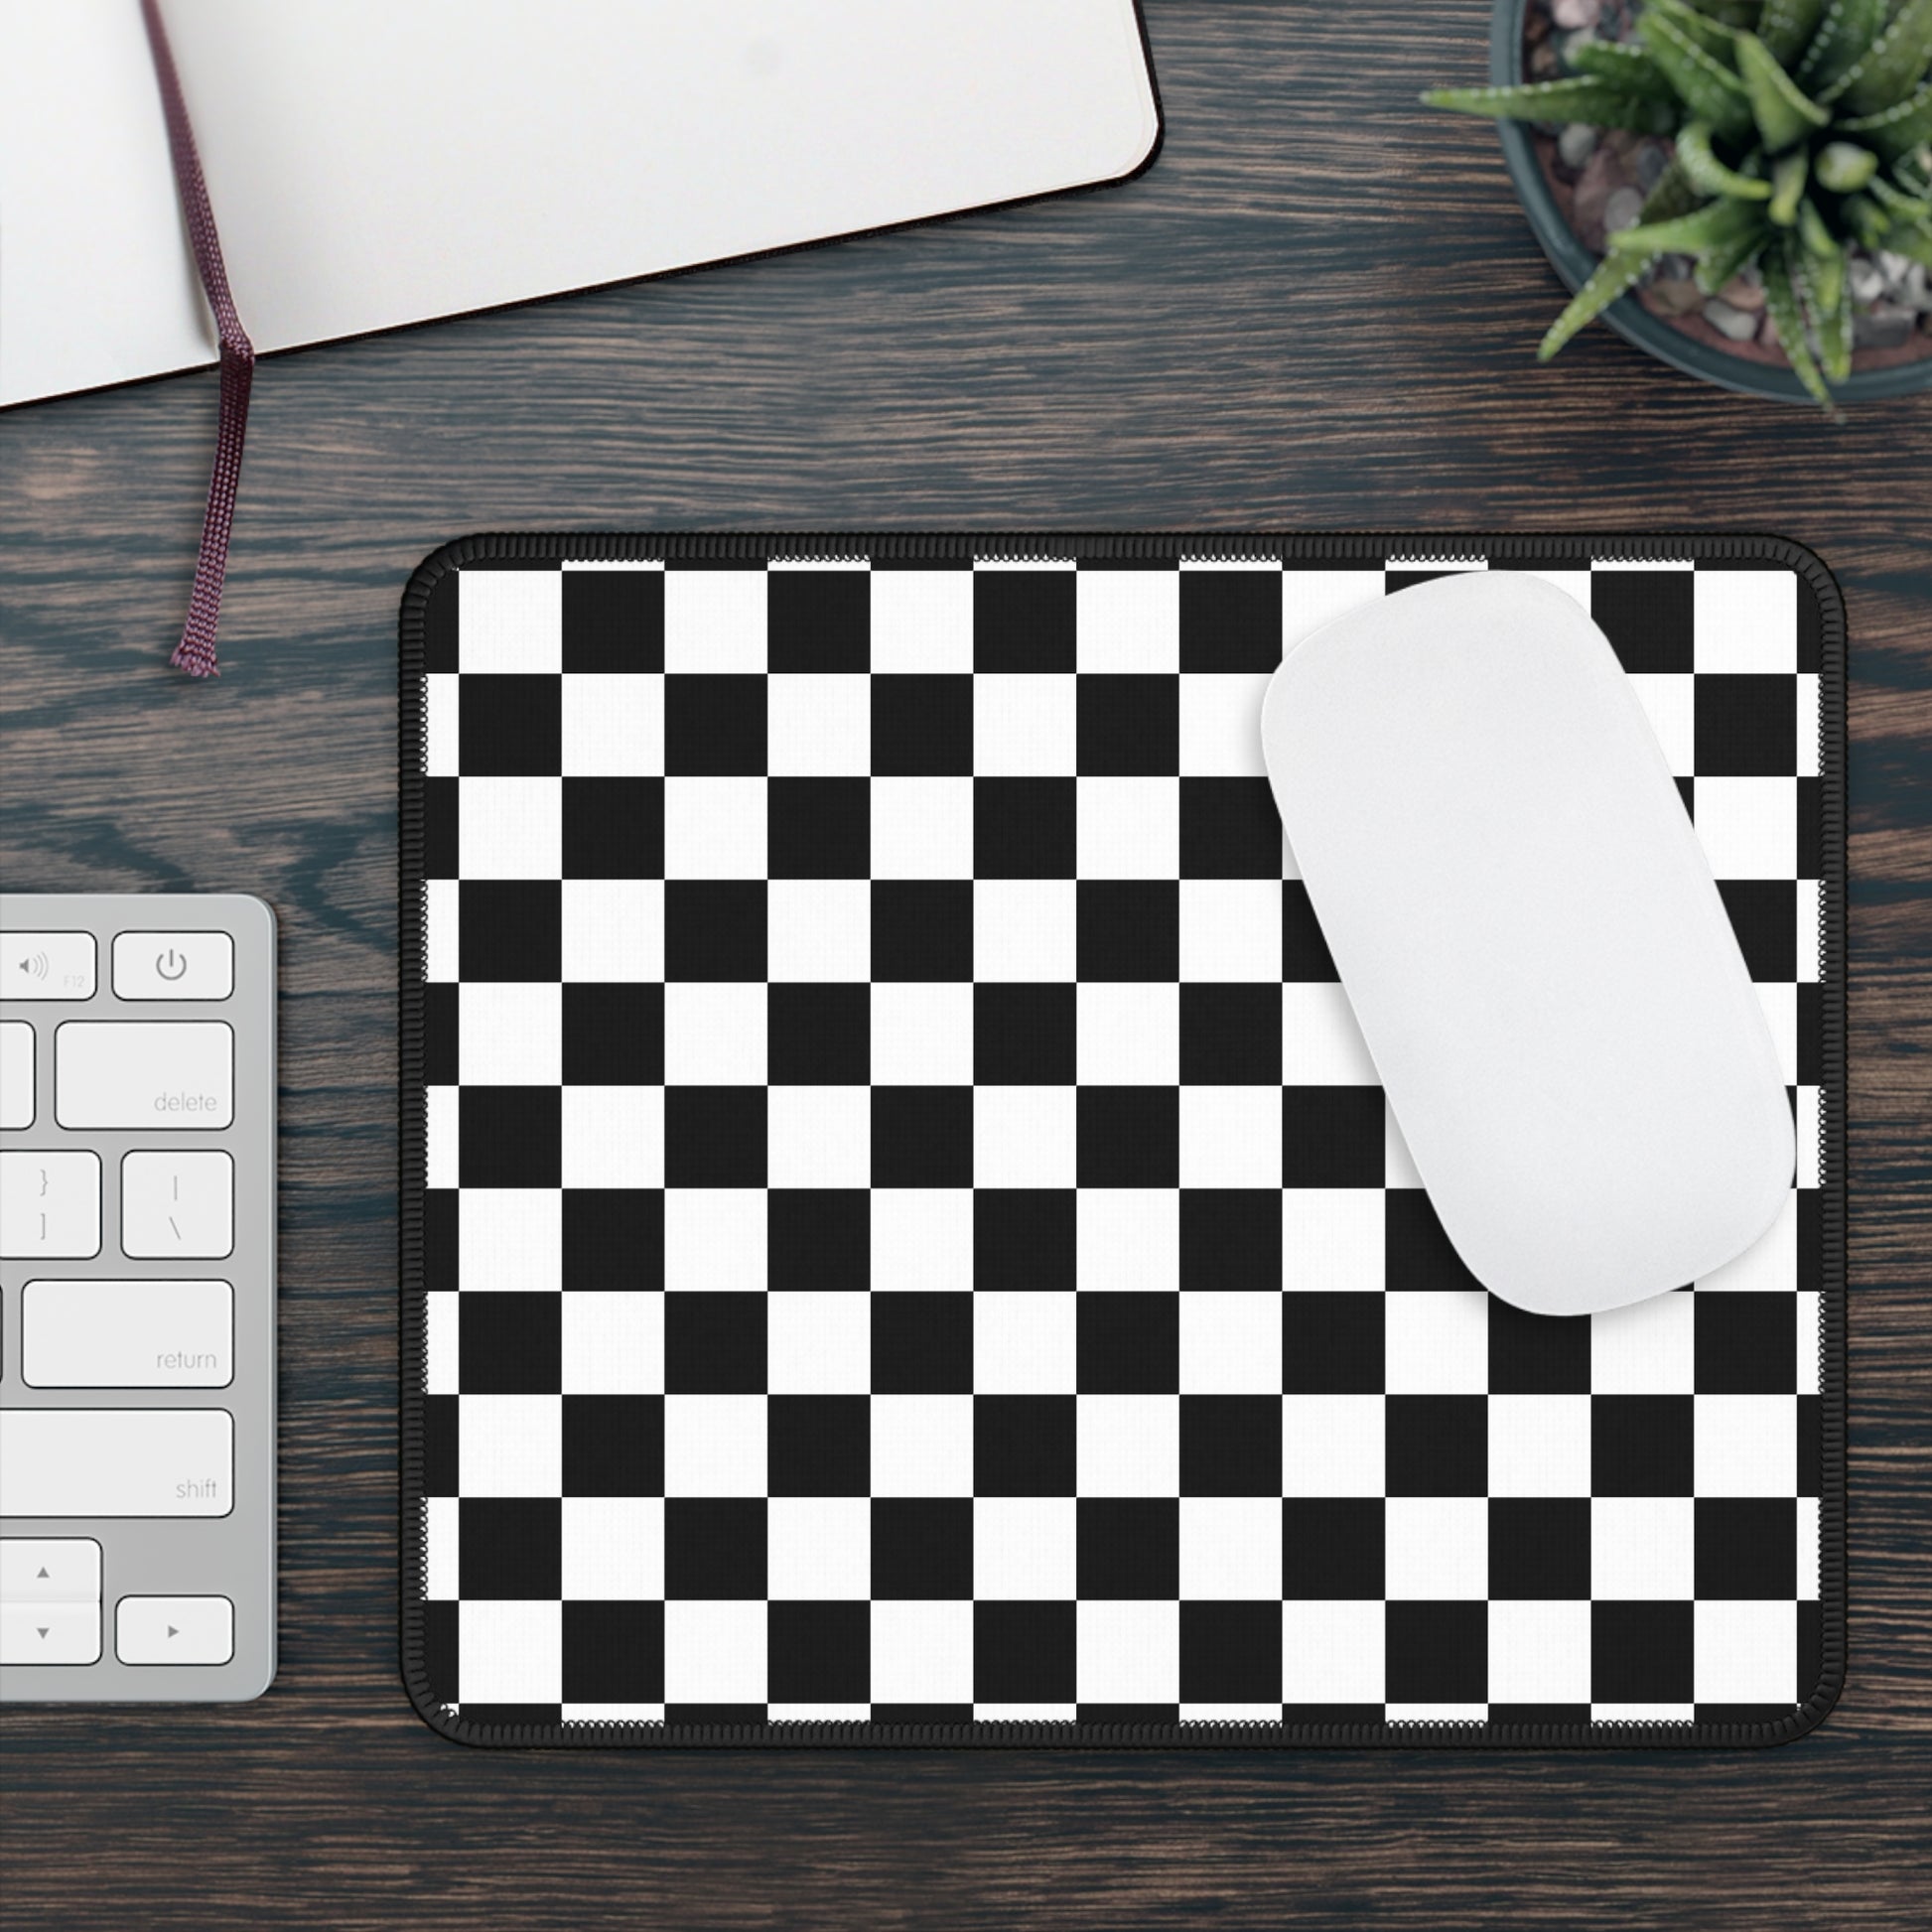 Black & White Checkered Gaming Mouse Pad - Desk Cookies